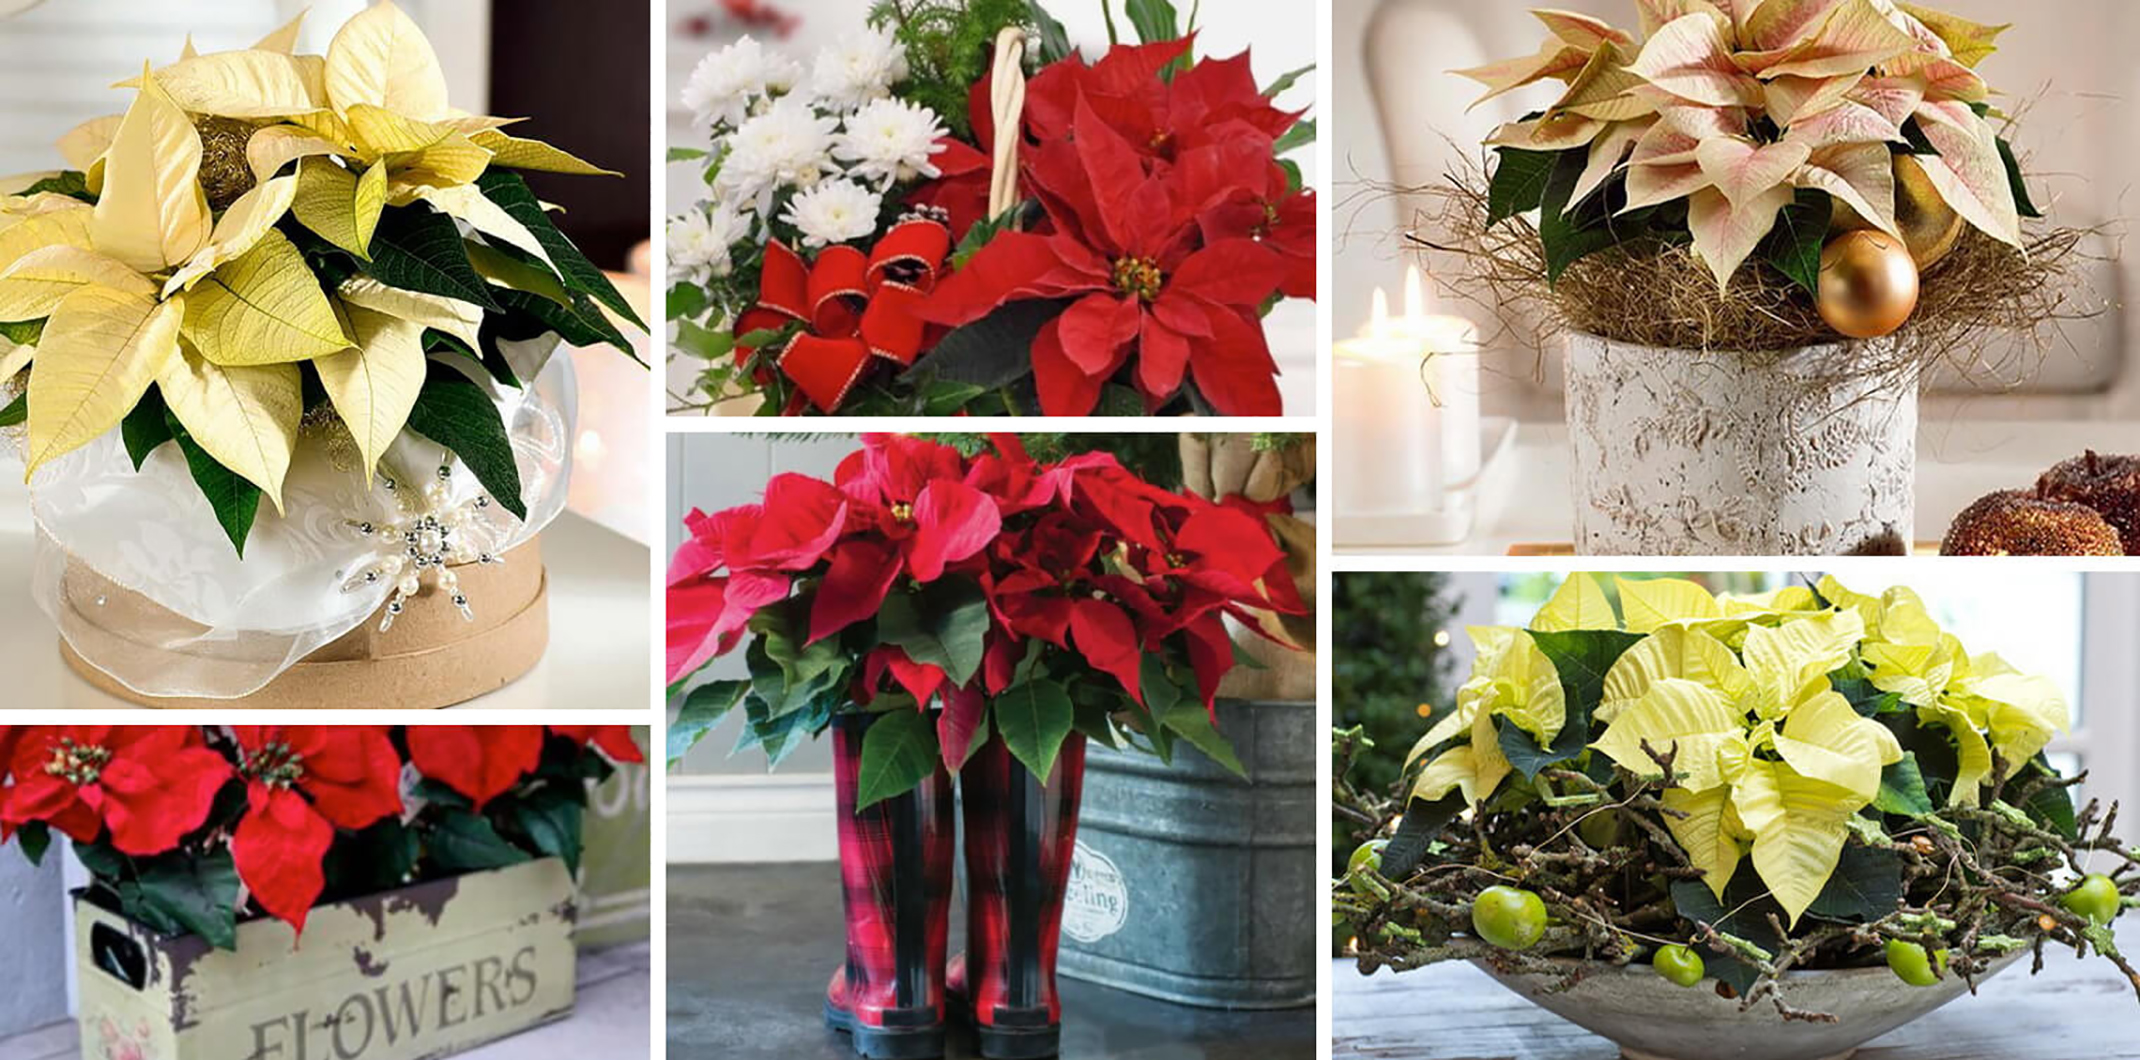 Poinsettia collage of different poinsettias and in different arrangements